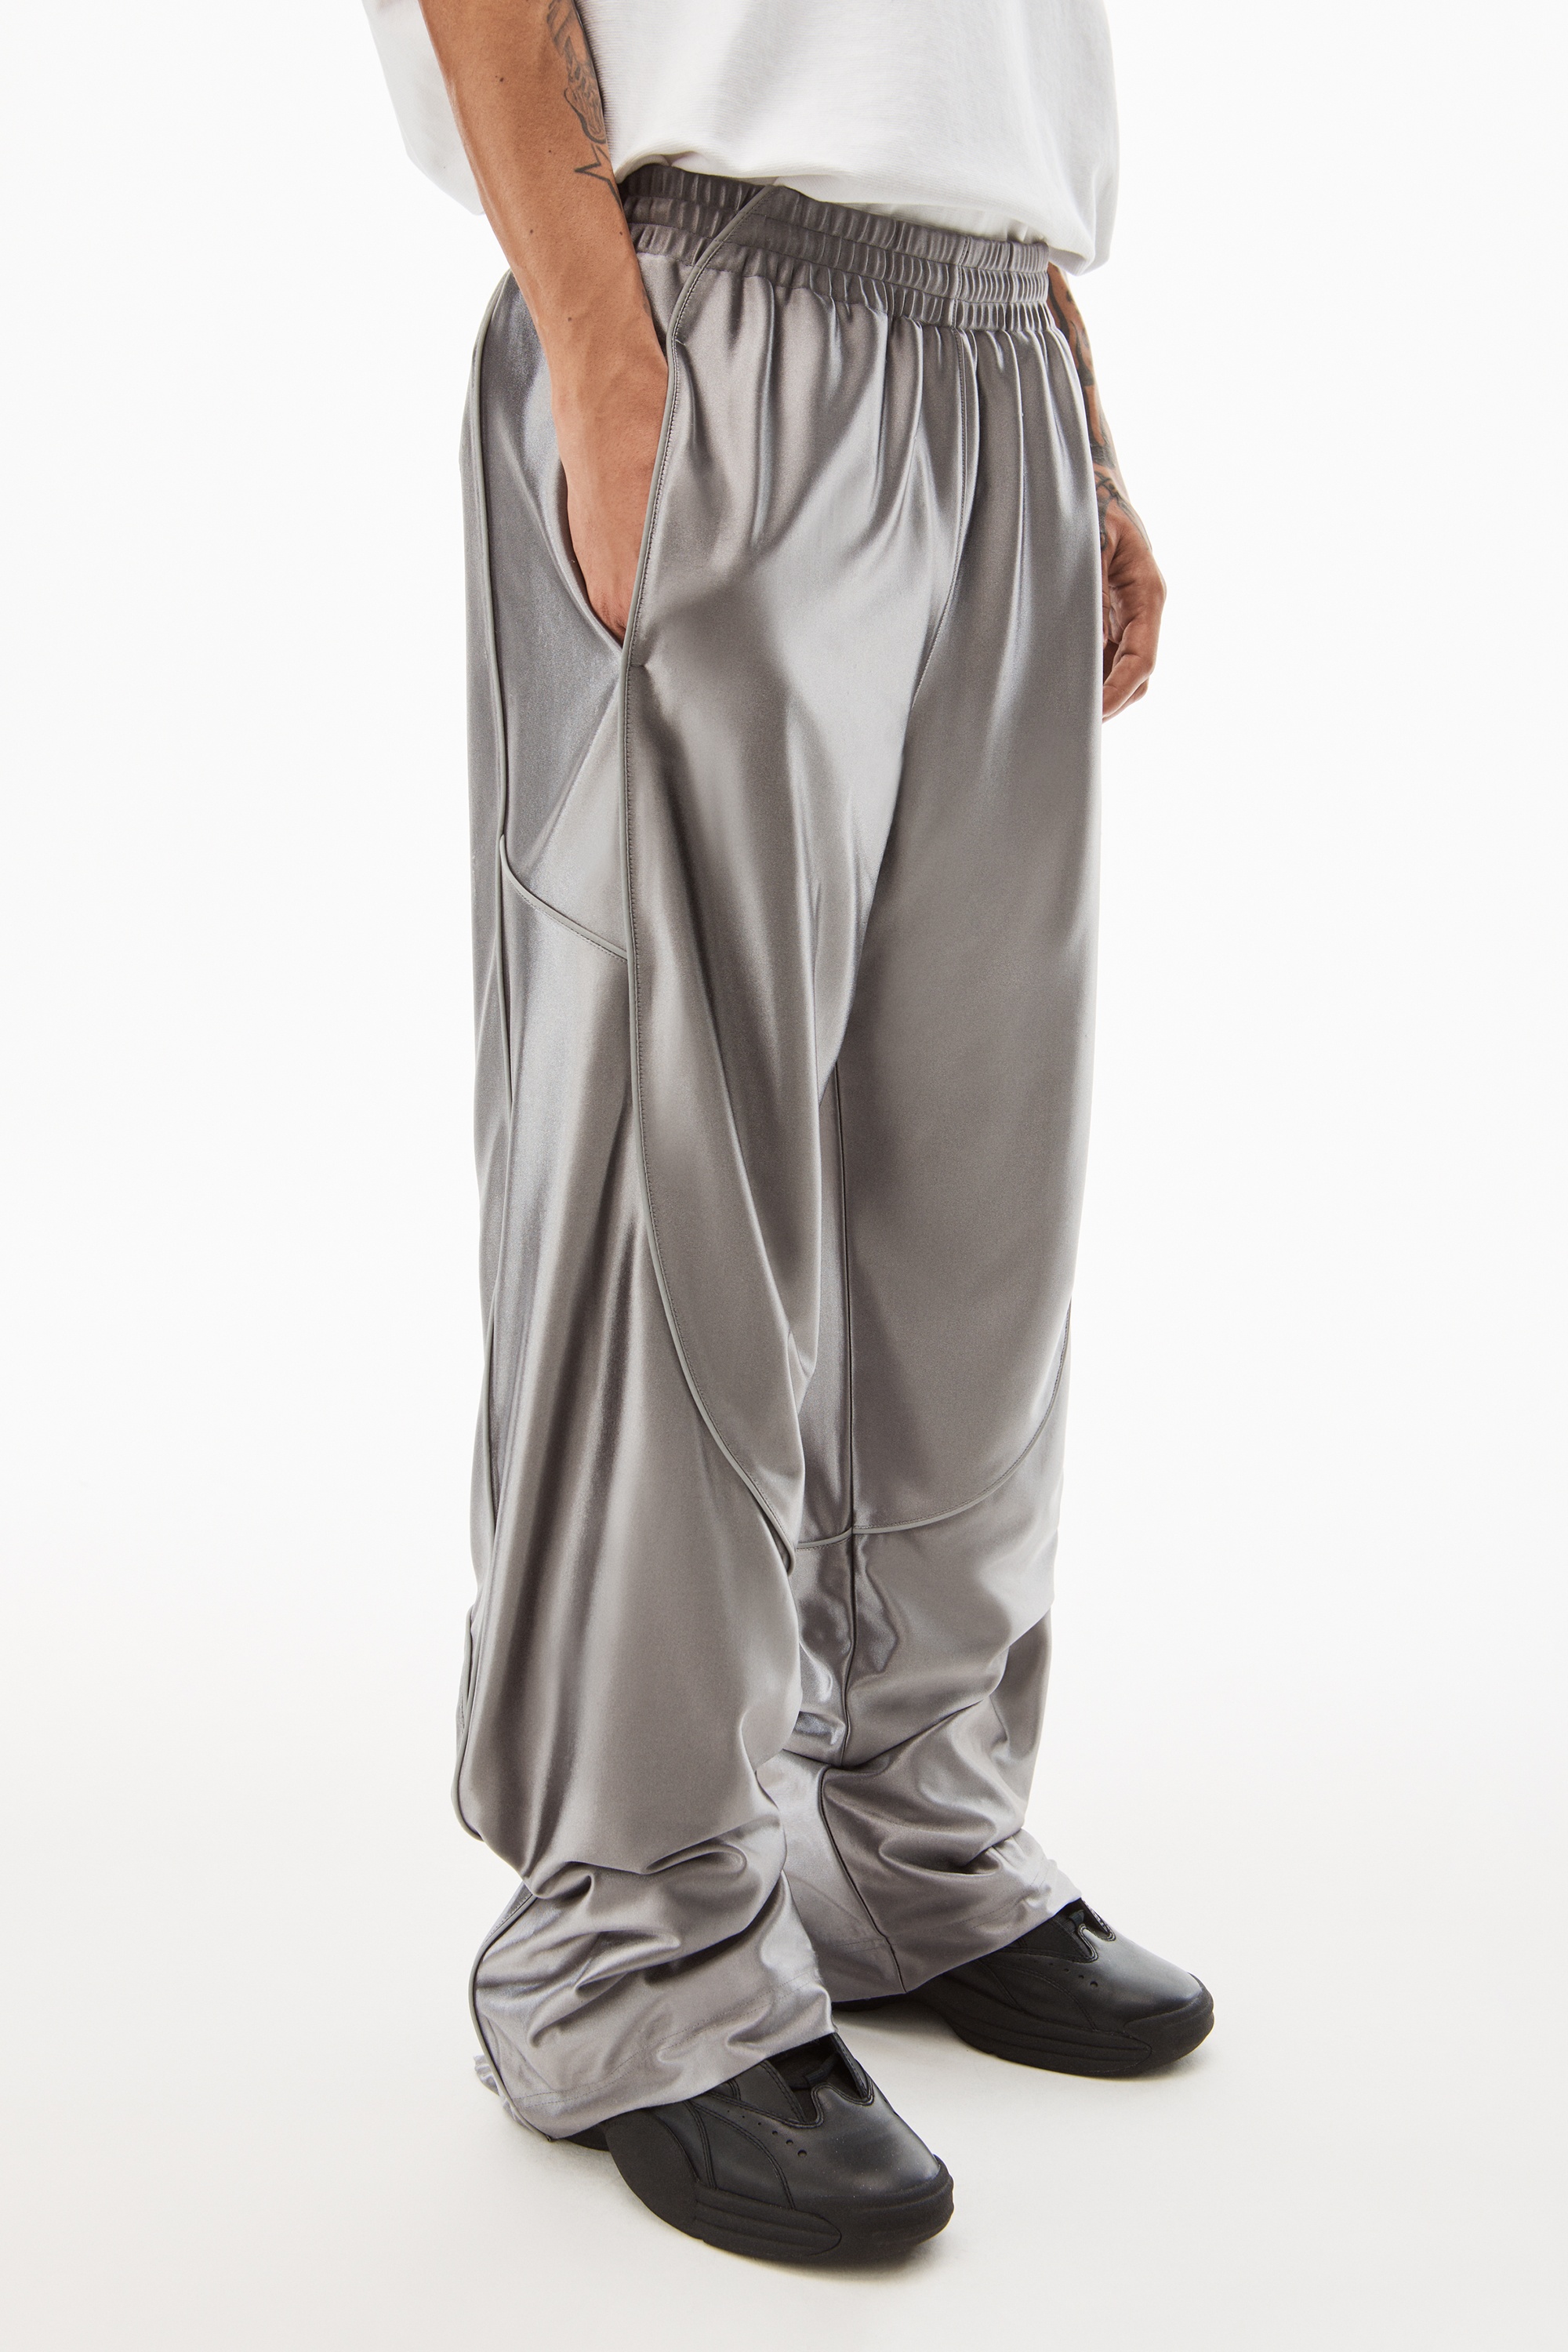 TRACK PANTS IN SATIN FAILLE JERSEY - 3